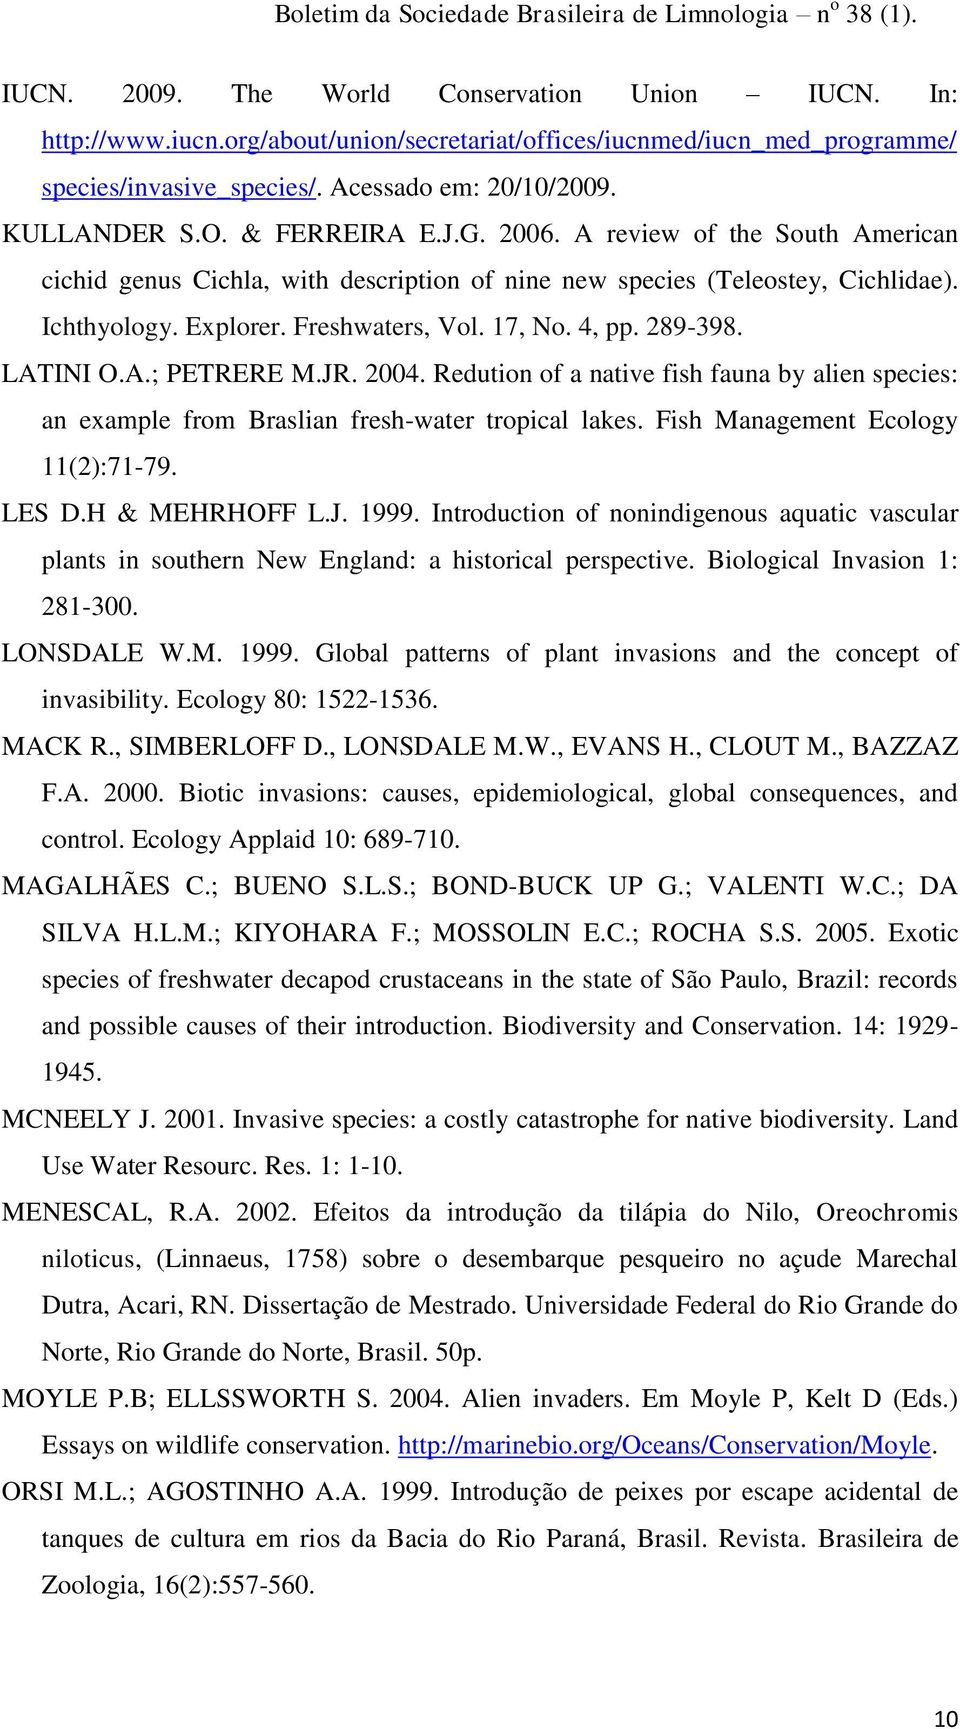 289-398. LATINI O.A.; PETRERE M.JR. 2004. Redution of a native fish fauna by alien species: an example from Braslian fresh-water tropical lakes. Fish Management Ecology 11(2):71-79. LES D.